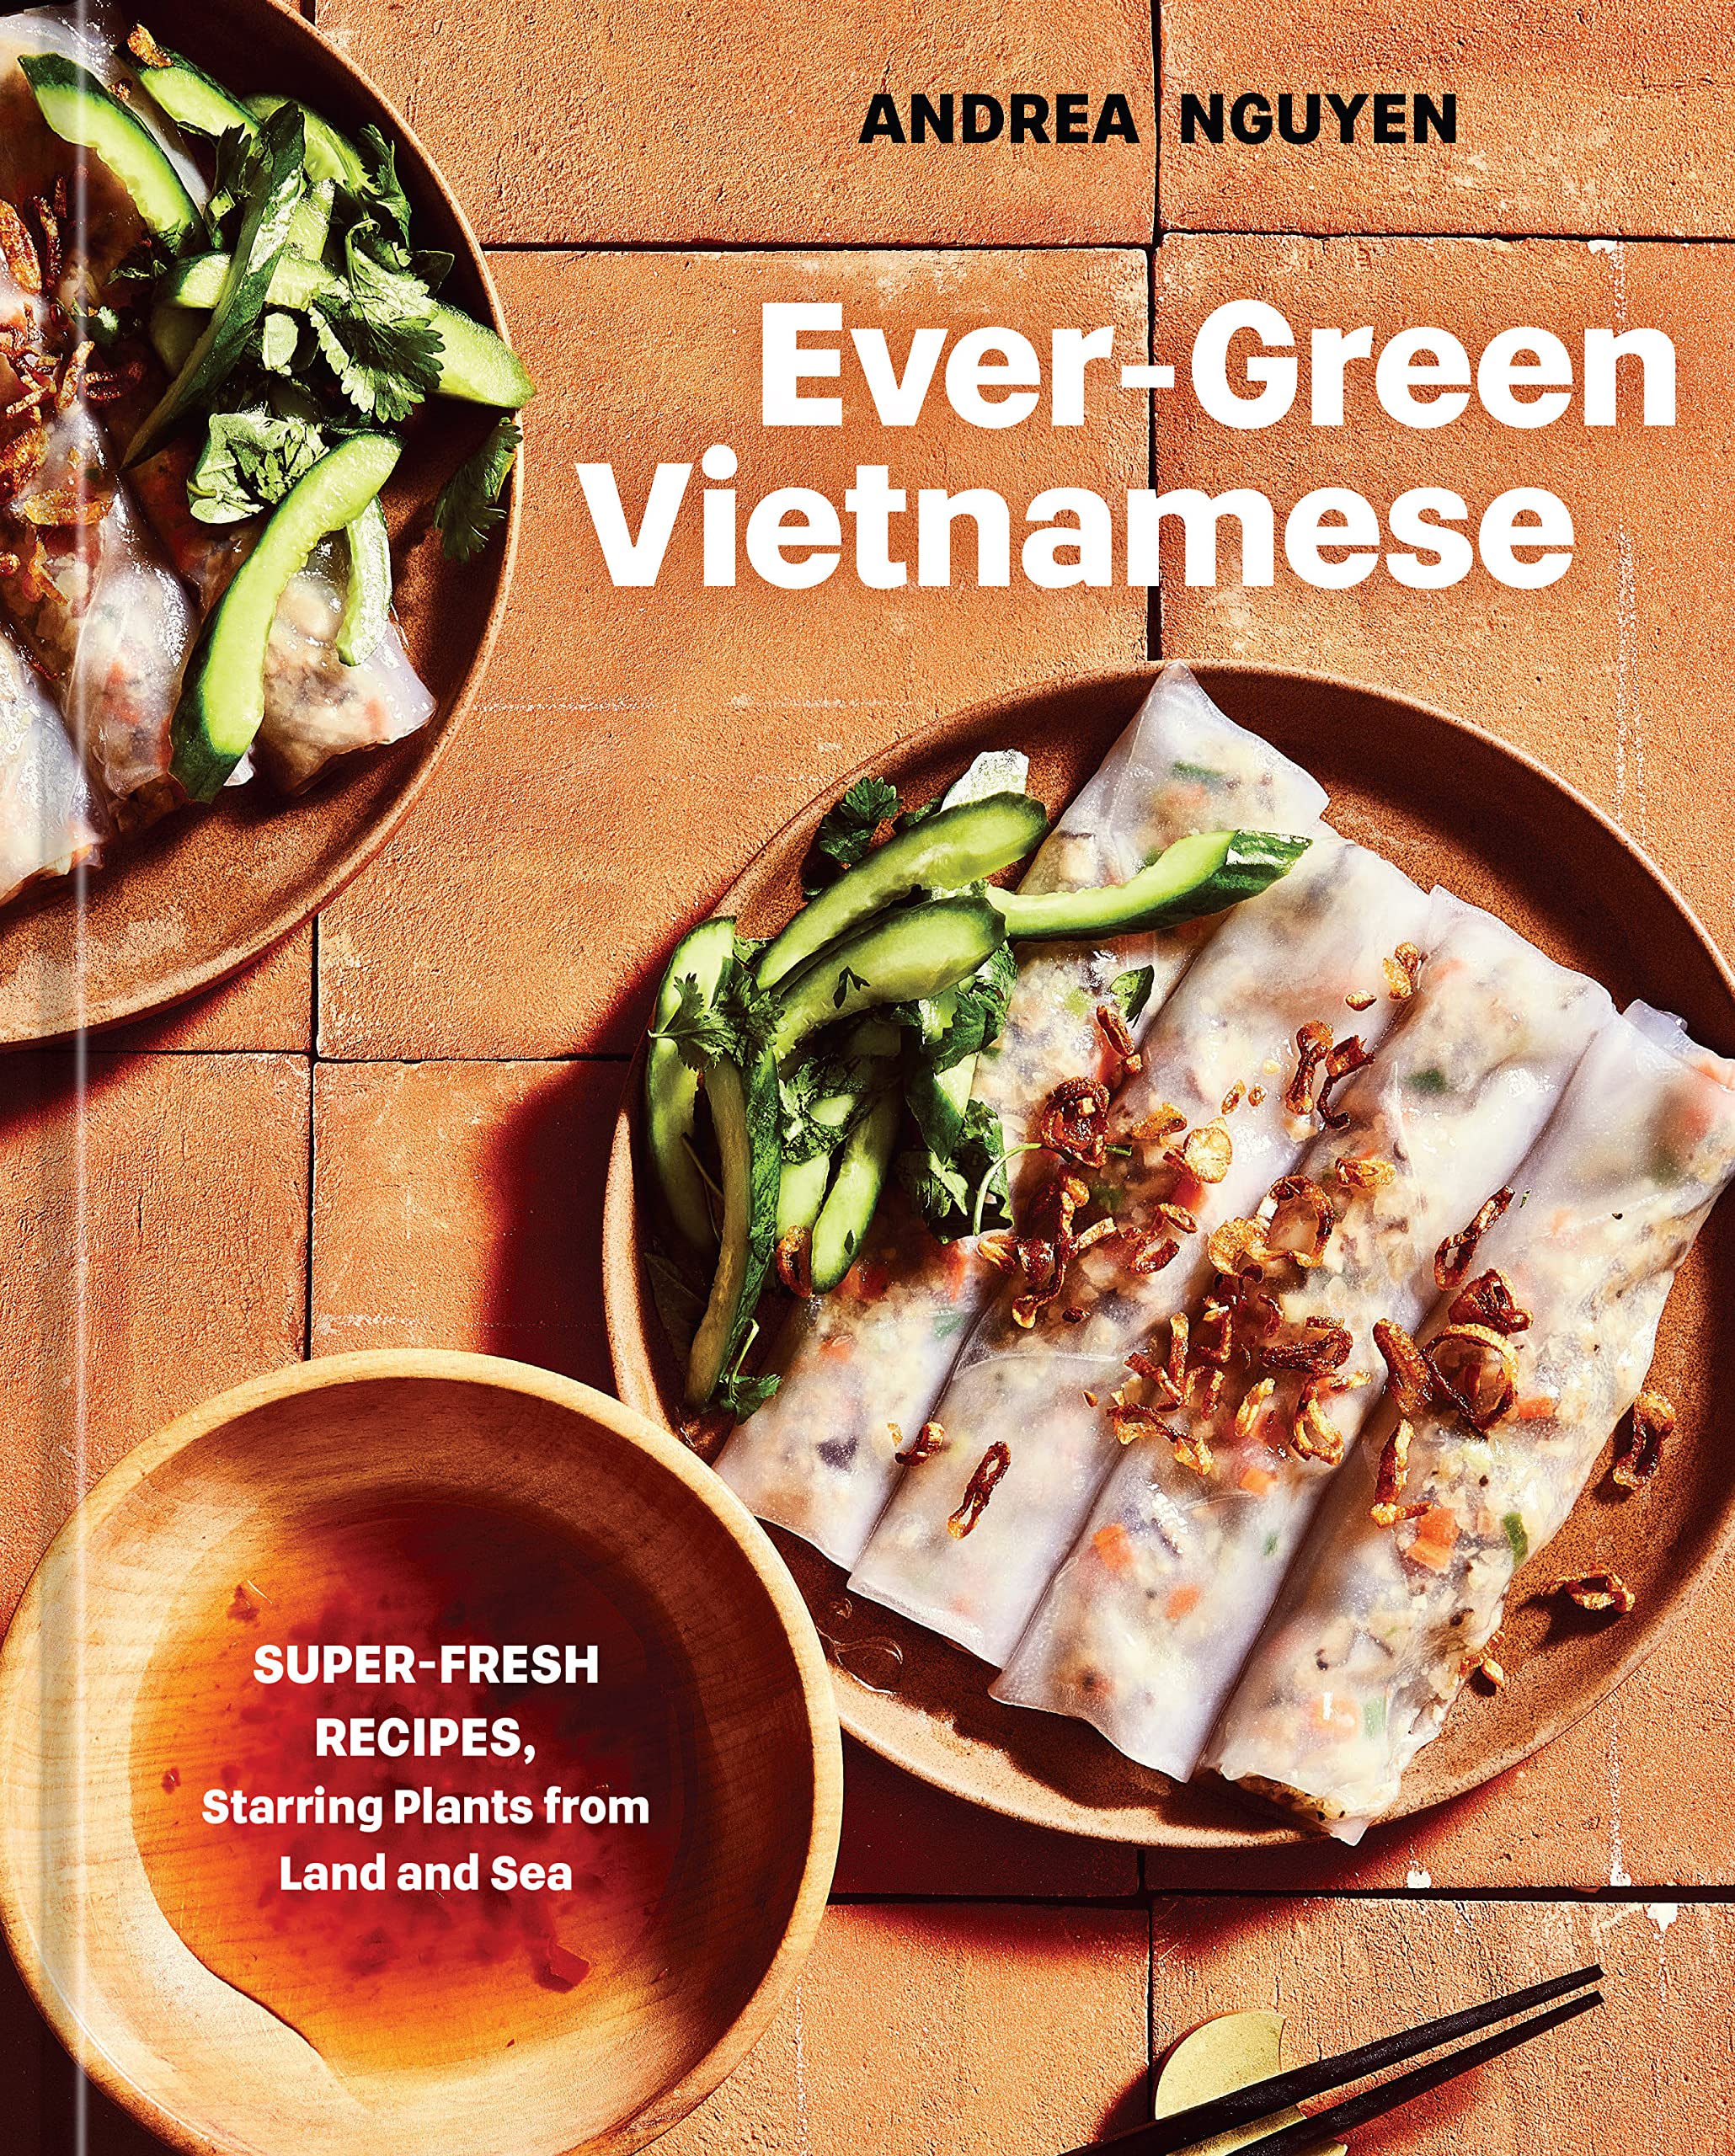 Ever-Green Vietnamese: Super-Fresh Recipes, Starring Plants from Land and Sea (Andrea Nguyen) *Signed*